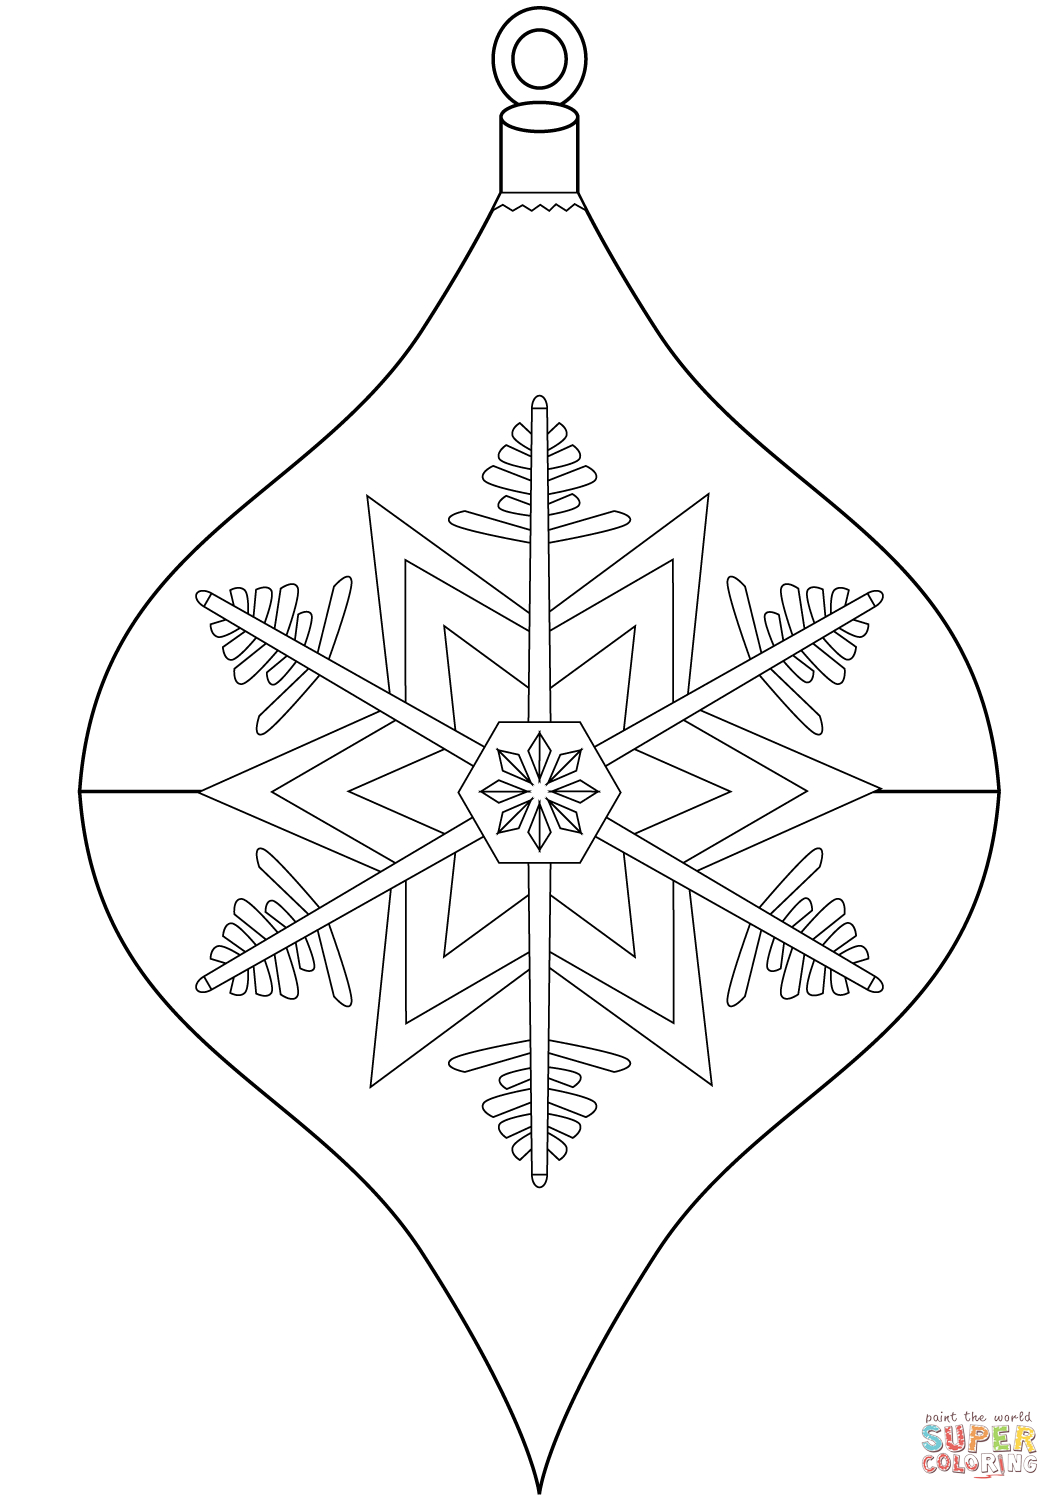 Christmas Ornament Coloring Page | Free Printable Coloring Pages - Free Printable Christmas Ornament Coloring Pages